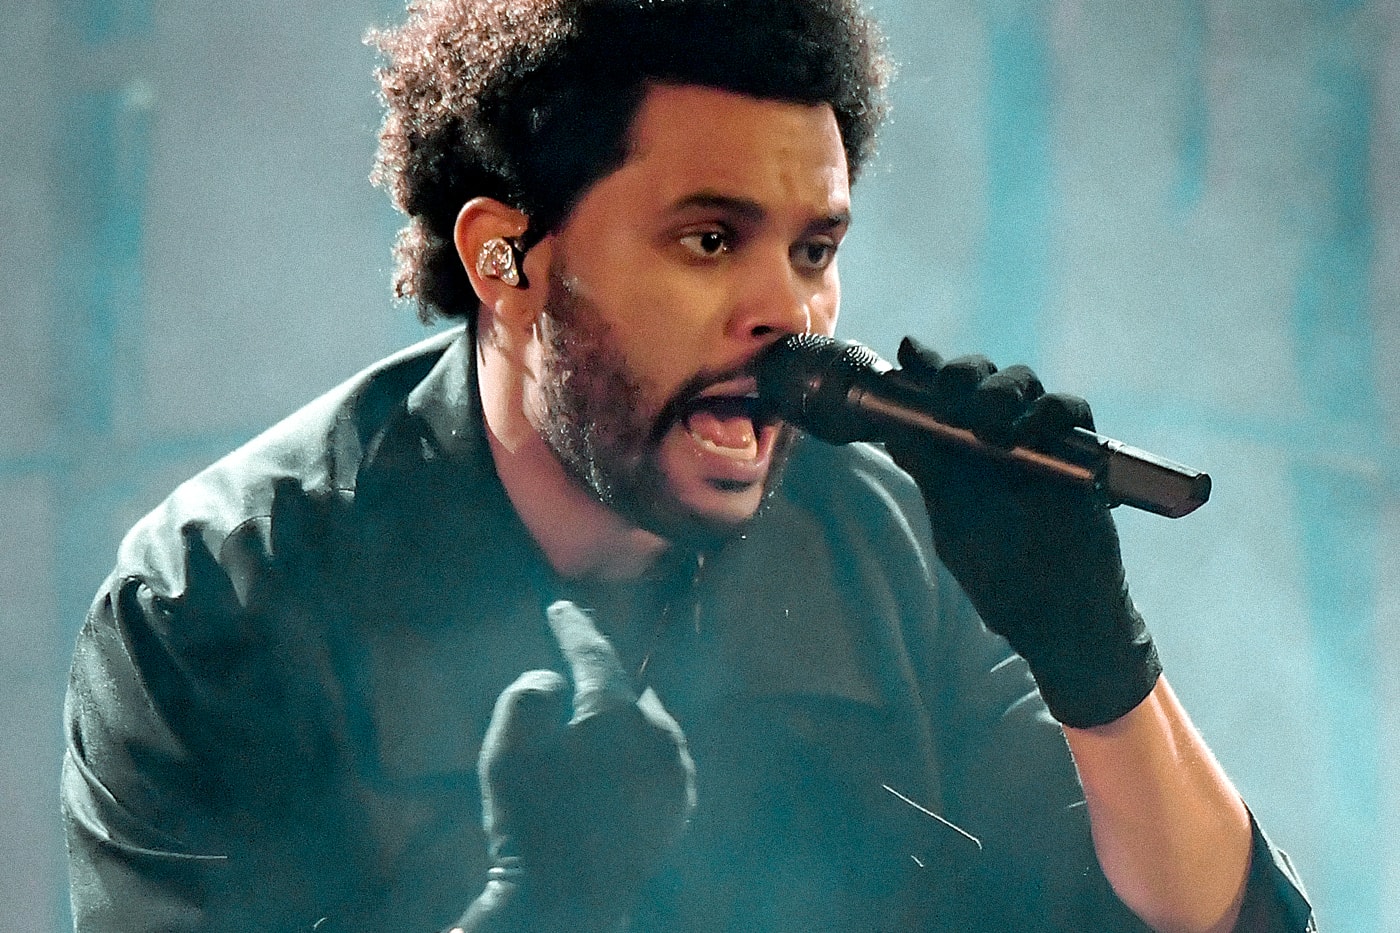 The Weeknd Loses Voice Los Angeles After Hours til Dawn Tour Show End Video Info